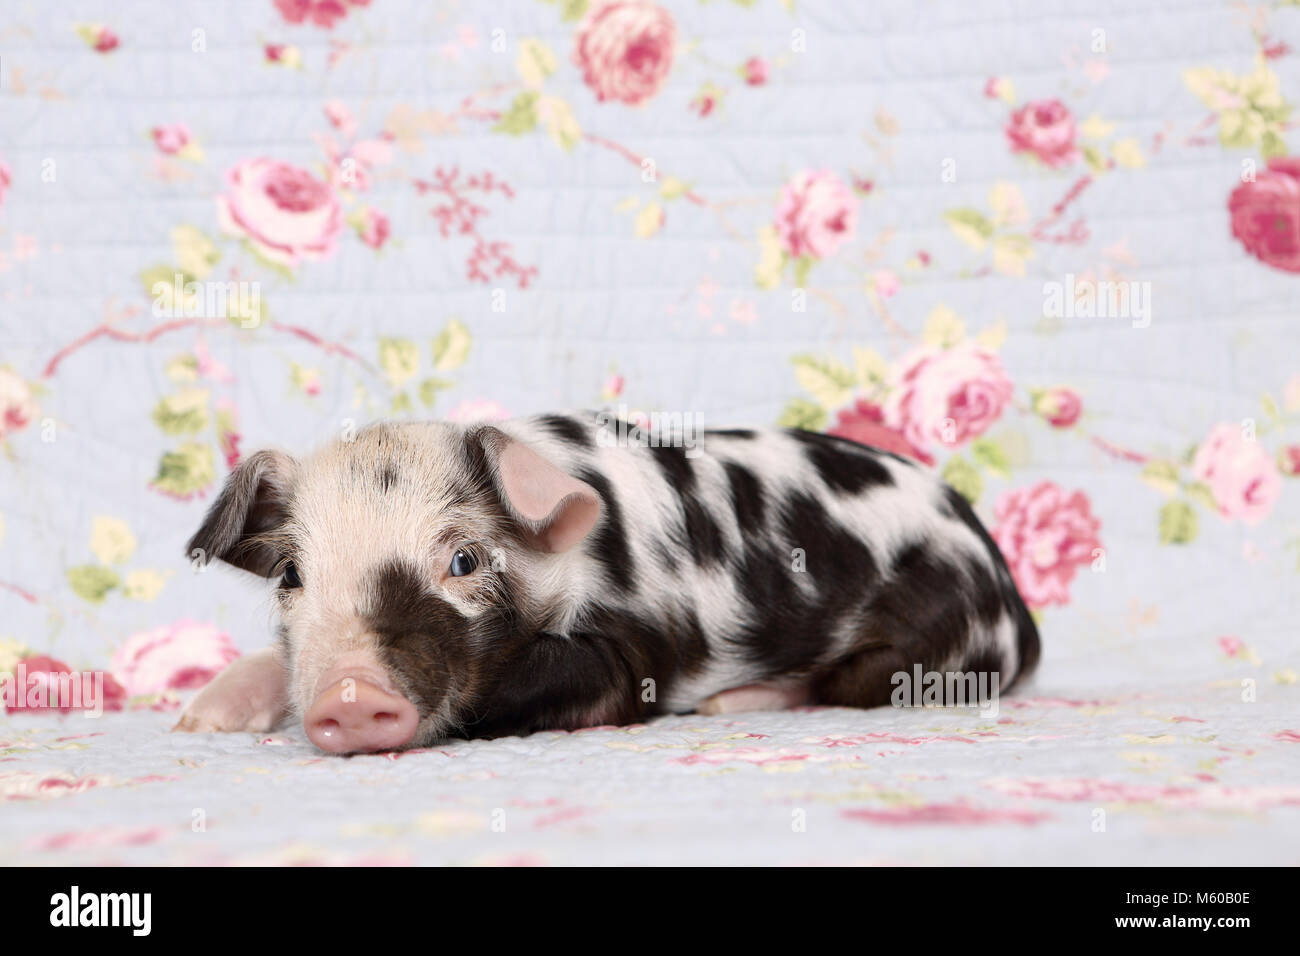 Domestic Pig, Turopolje x ?. Piglet (1 week old) lying. Studio picture against a blue background with rose flower print. Germany Stock Photo